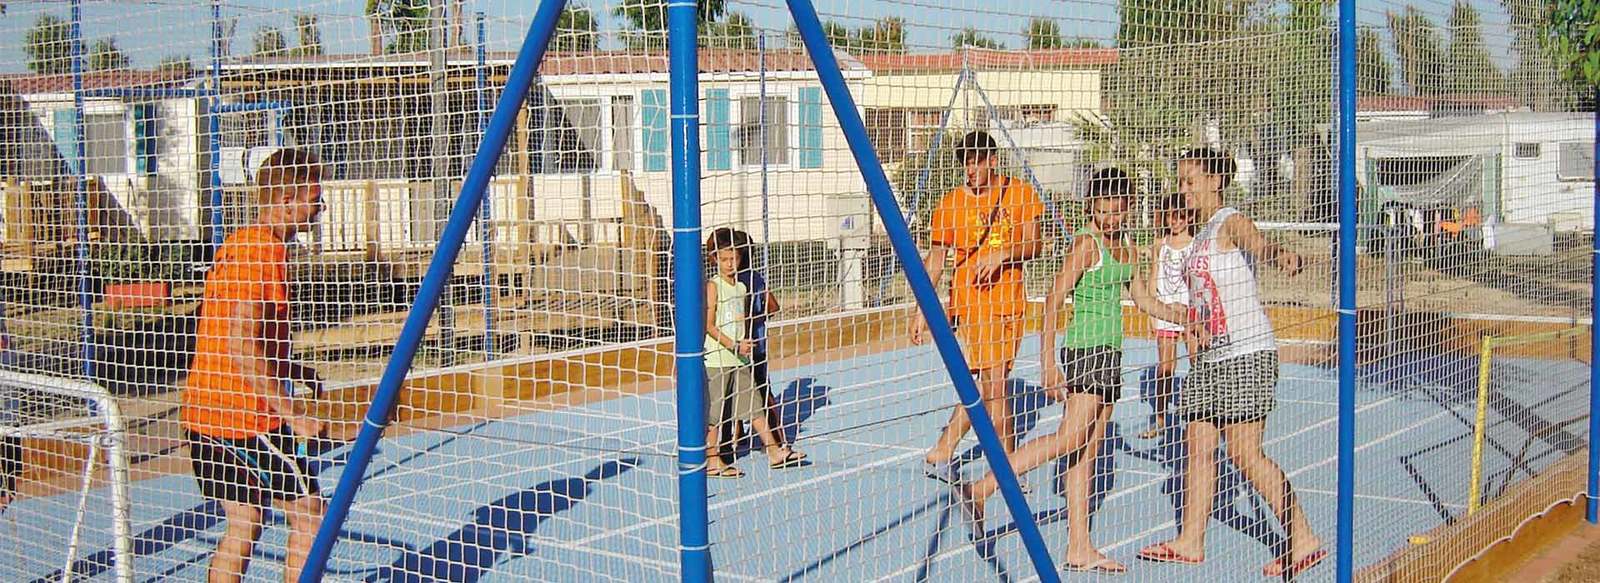 Camping Village immerso nel verde